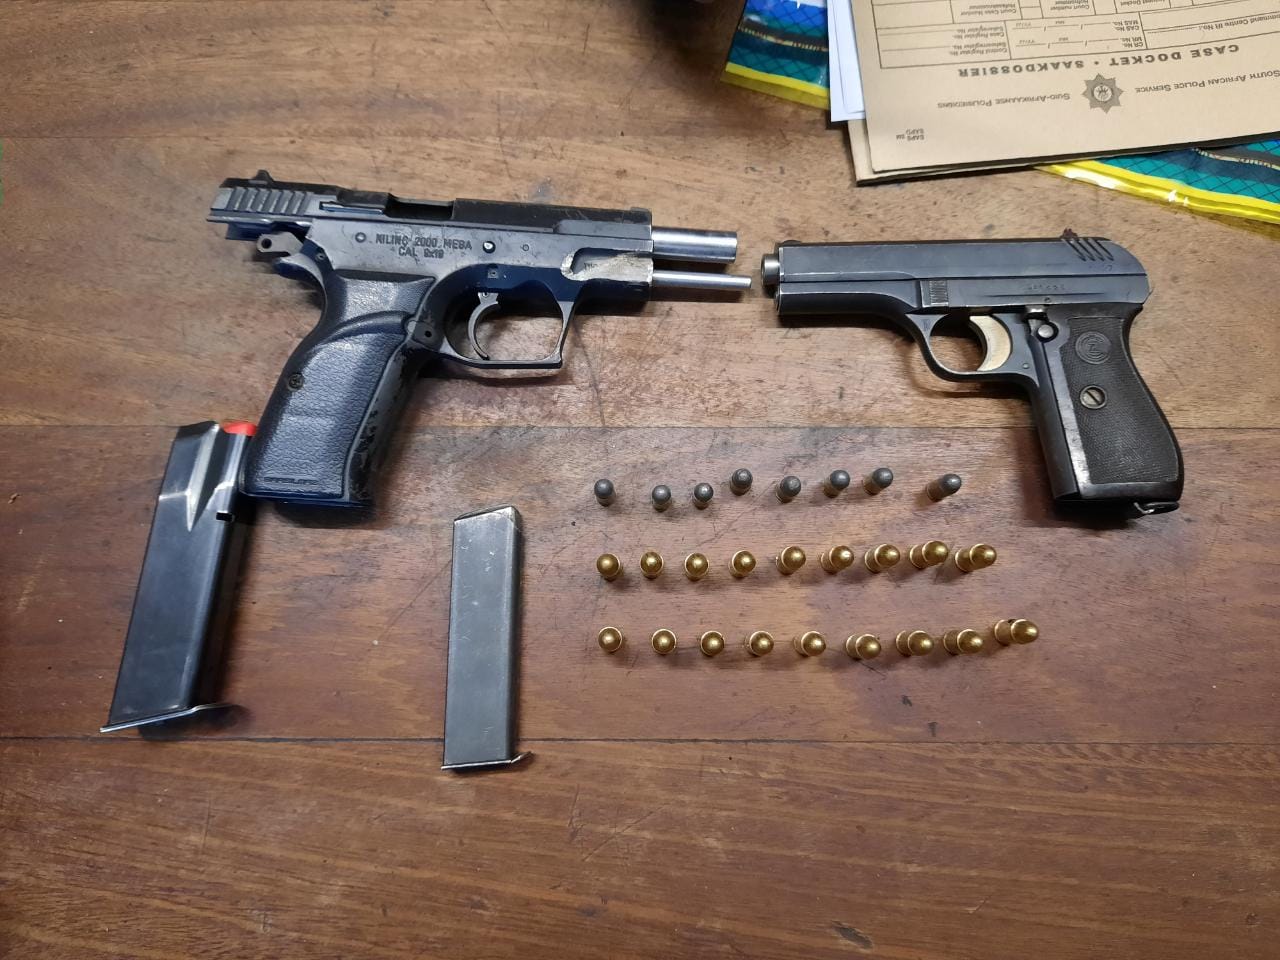 Police bust suspects in possession of firearms and ammunition